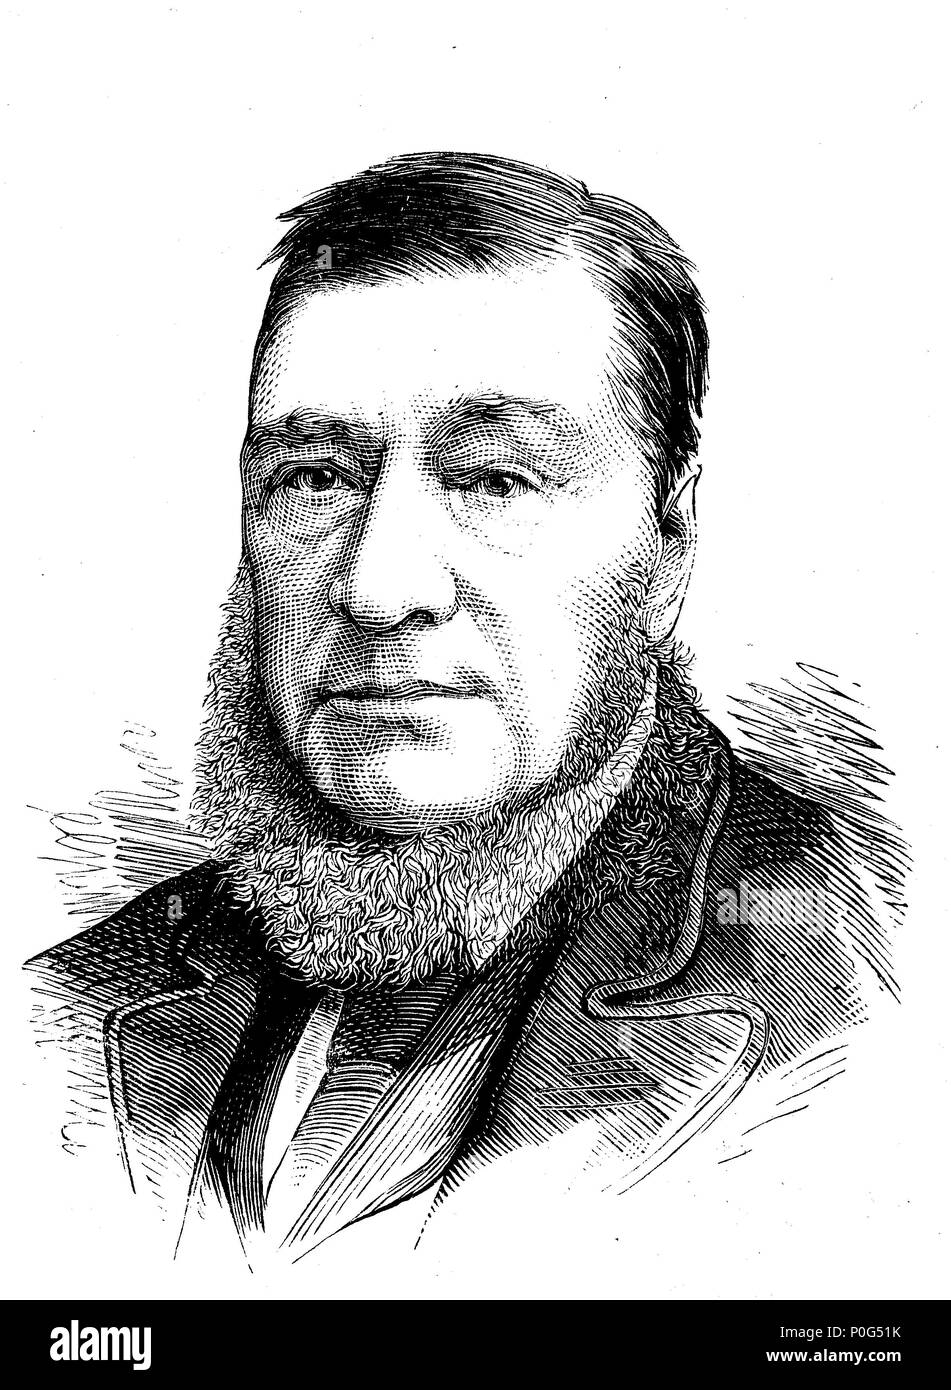 The rebellion in the Transvaal and Basuto-Land: Paul Kruger, President of the Transvaal and Member of the Rebel Triumvirate. The First Boer War, also known as the First Anglo-Boer War, the Transvaal War or the Transvaal Rebellion, was a war fought from 16 December 1880 until 23 March 1881 between the United Kingdom and the South African Republic , digital improved reproduction of an original print from the year 1881 Stock Photo